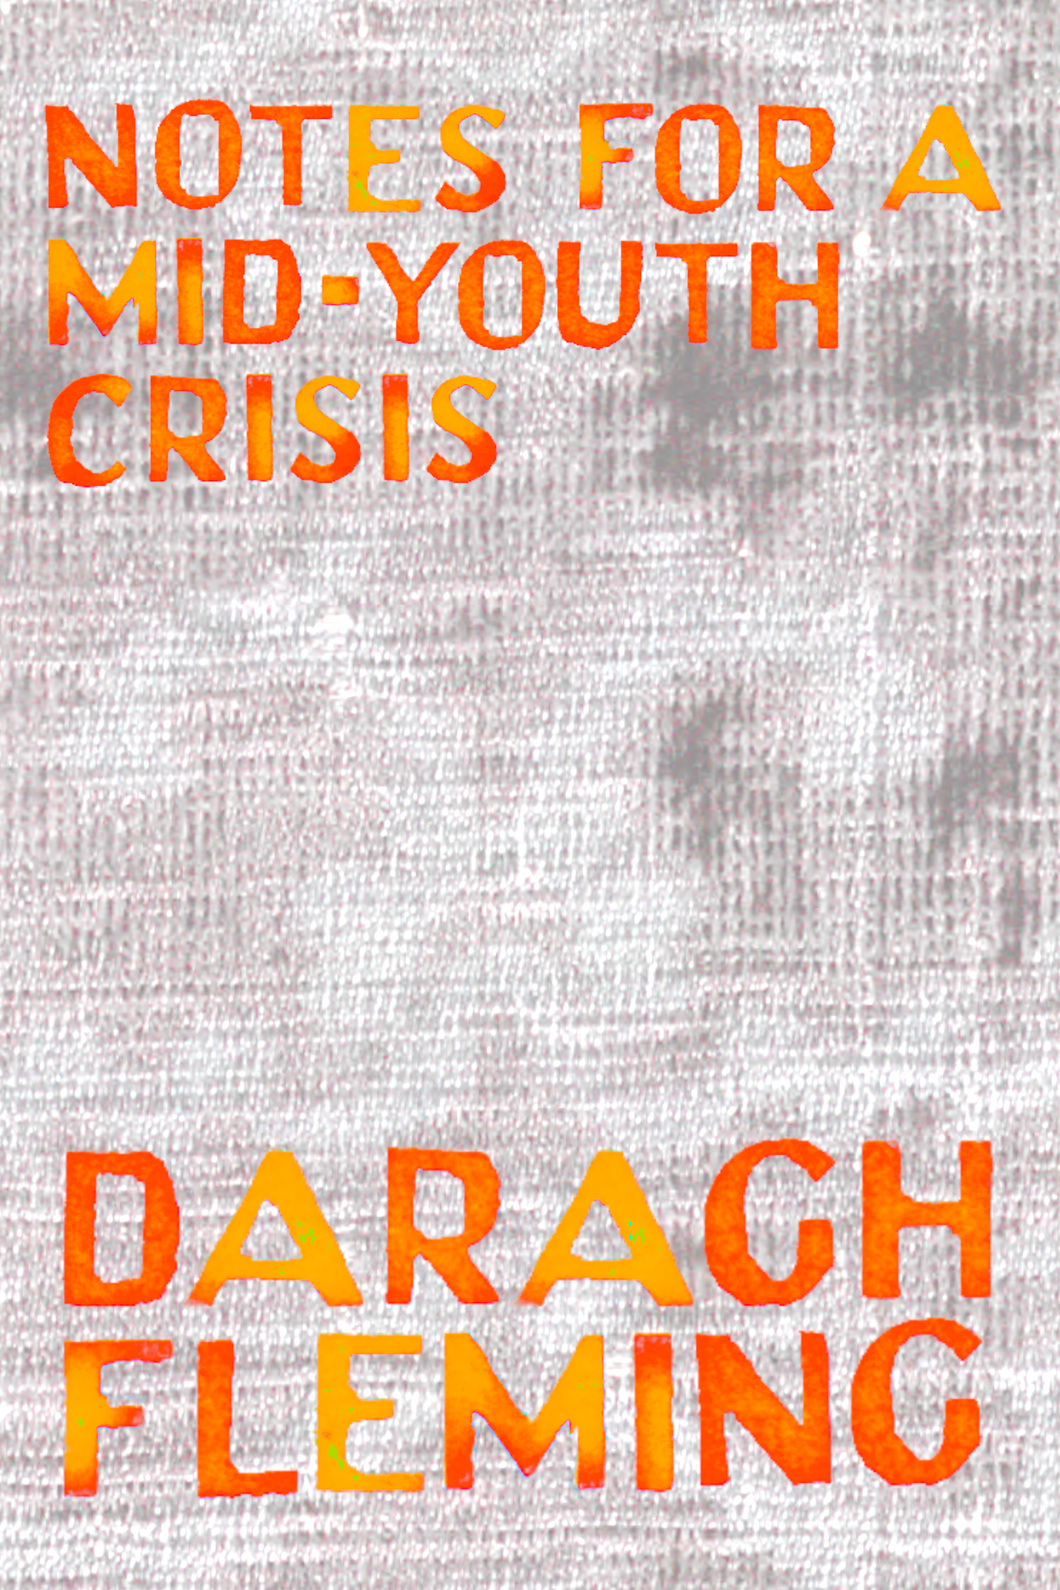 Notes For a Mid-Youth Crisis, by Daragh Fleming-Print Books-Bottlecap Press